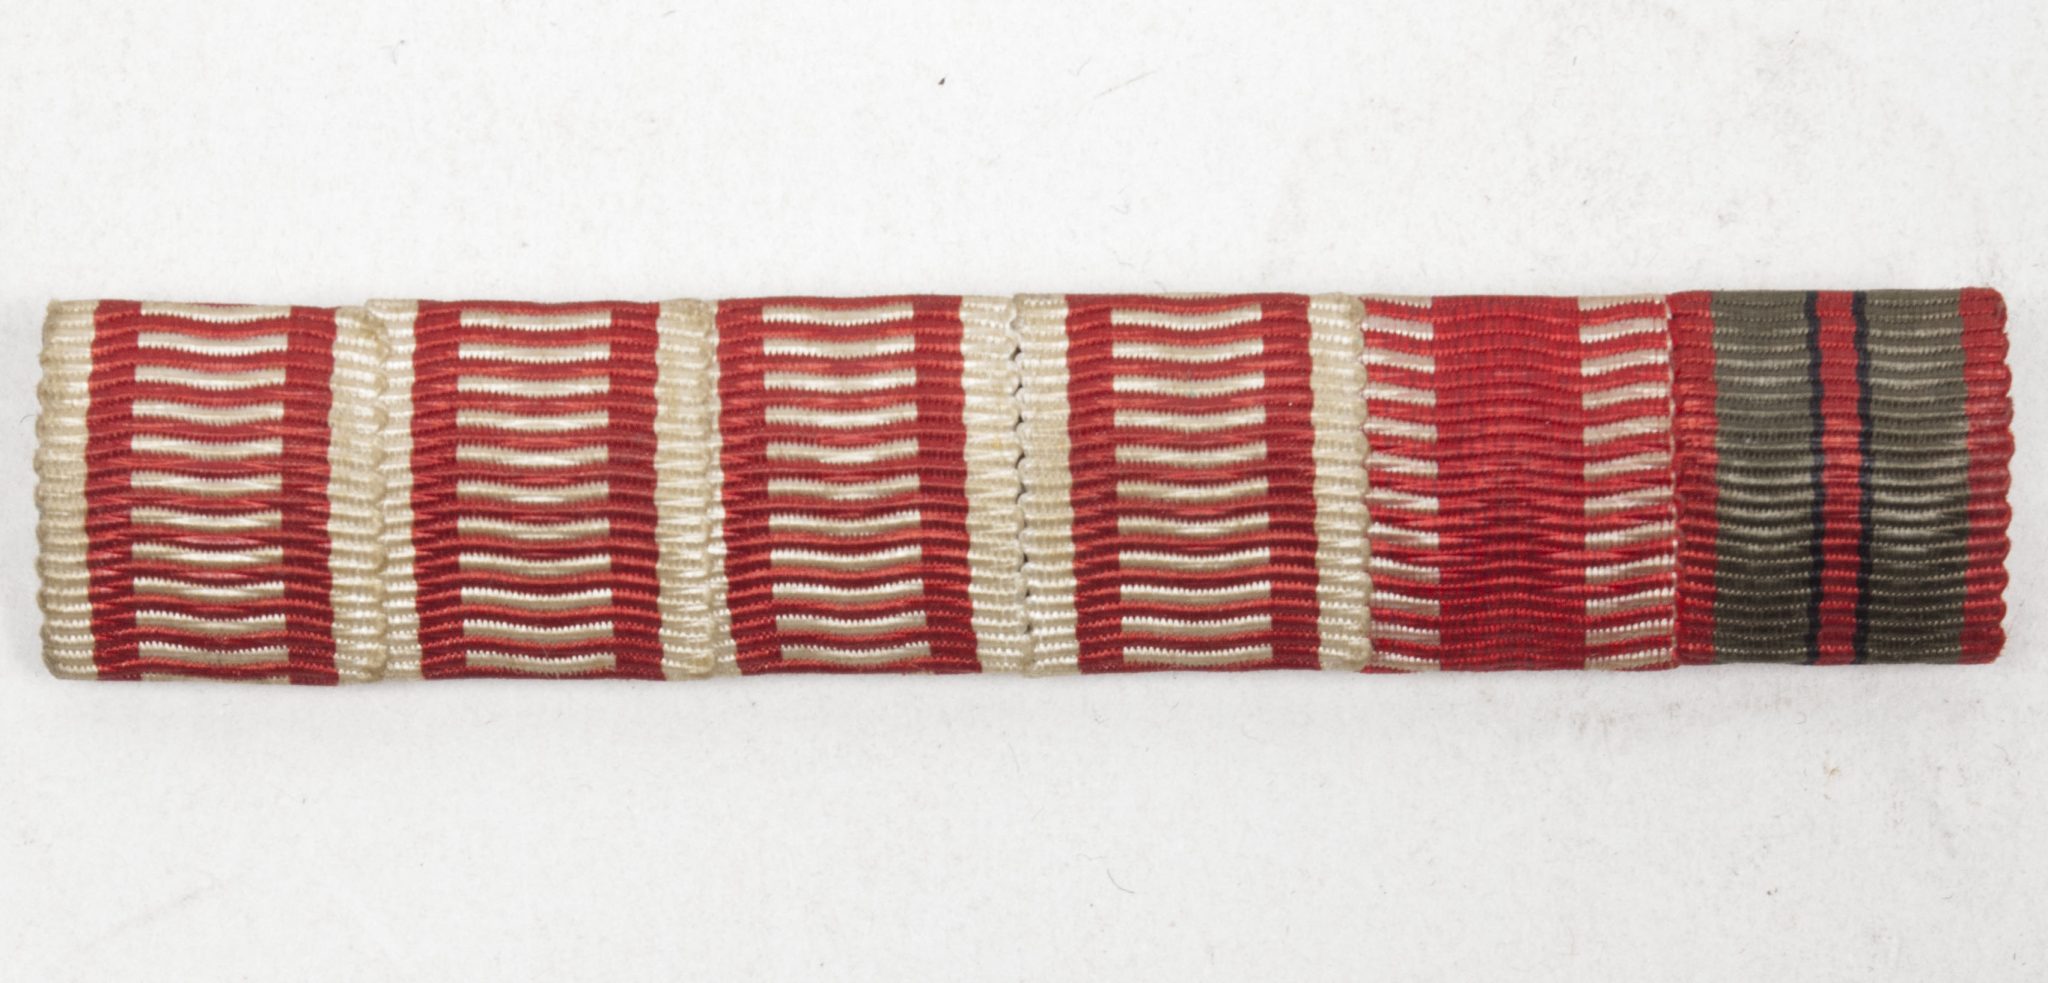 (Austria) WWI Austria Hungary ribbon with Bravery medals first and second classes, Karl Troop Cross, Wundmedal